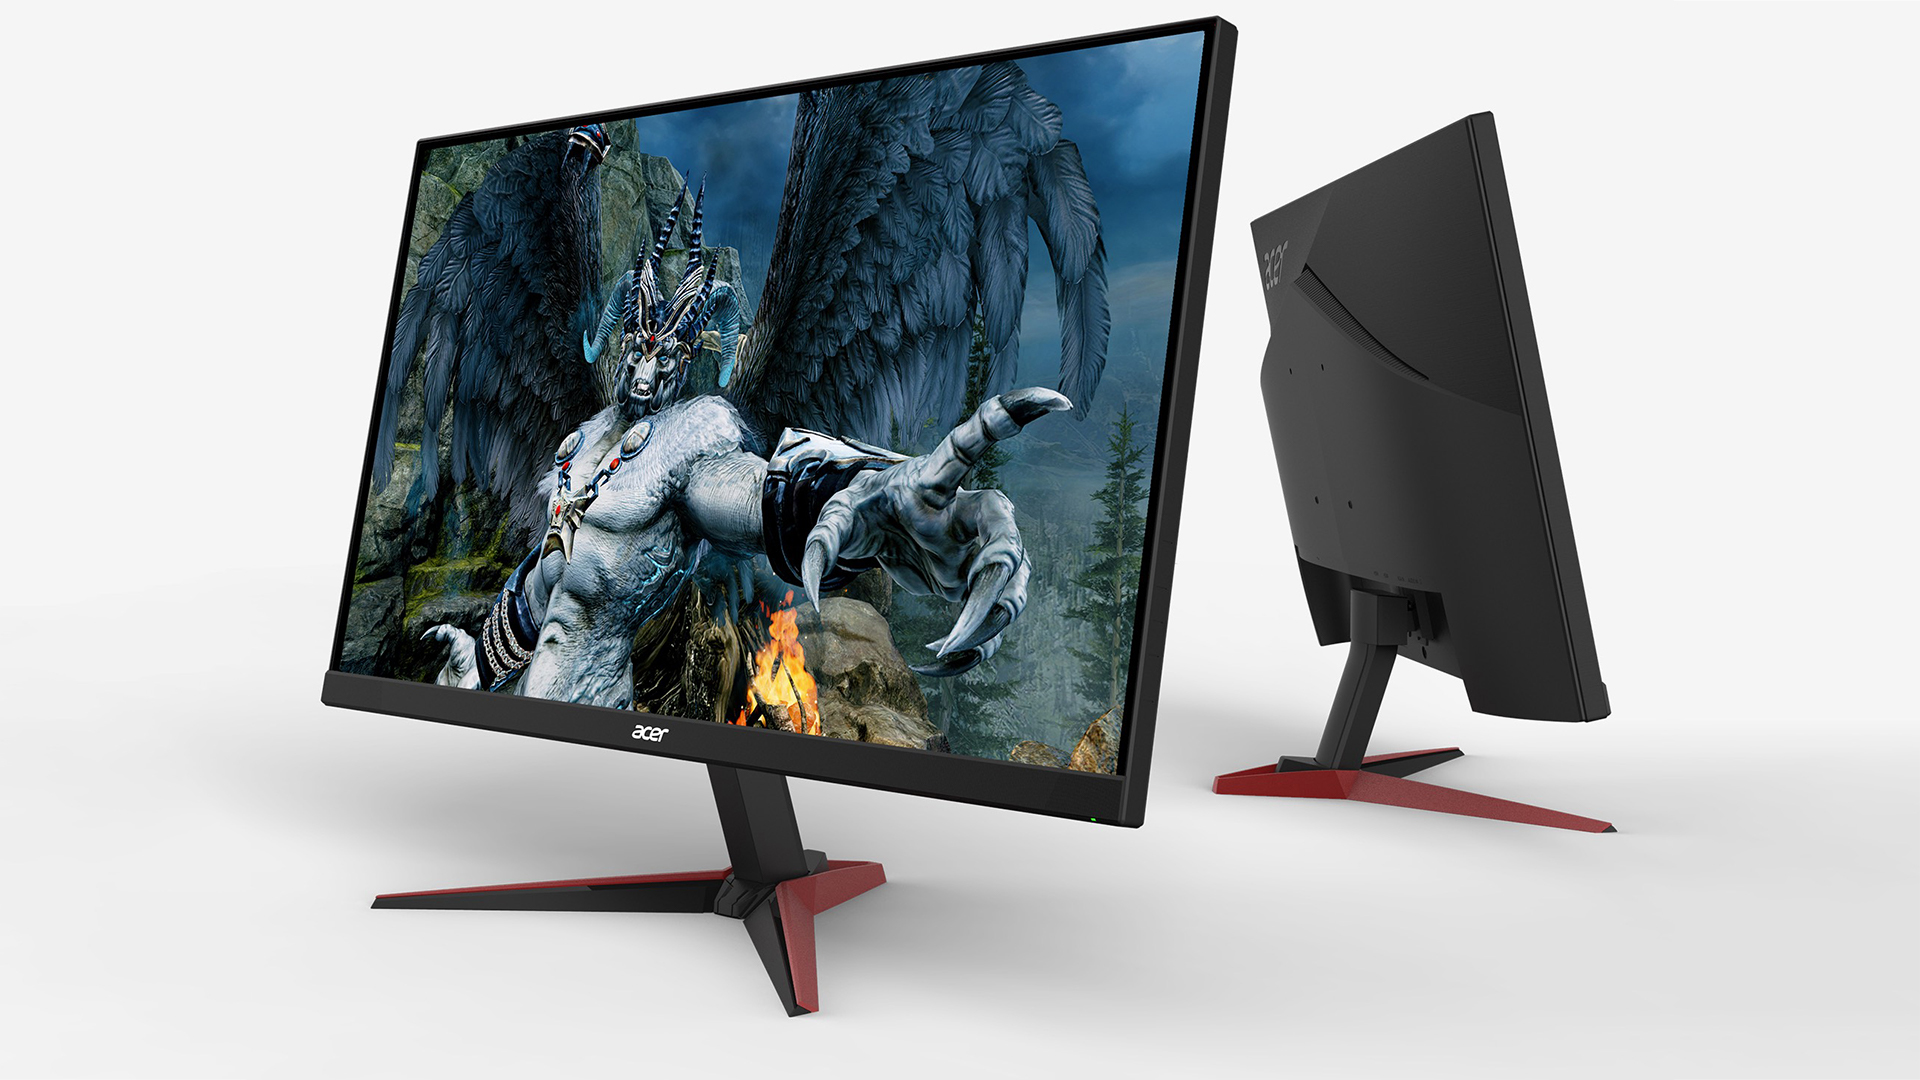 Acer Nitro VG240Y Pbiip review - a 144Hz monitor with FreeSync and deep OSD menu | LaptopMedia.com